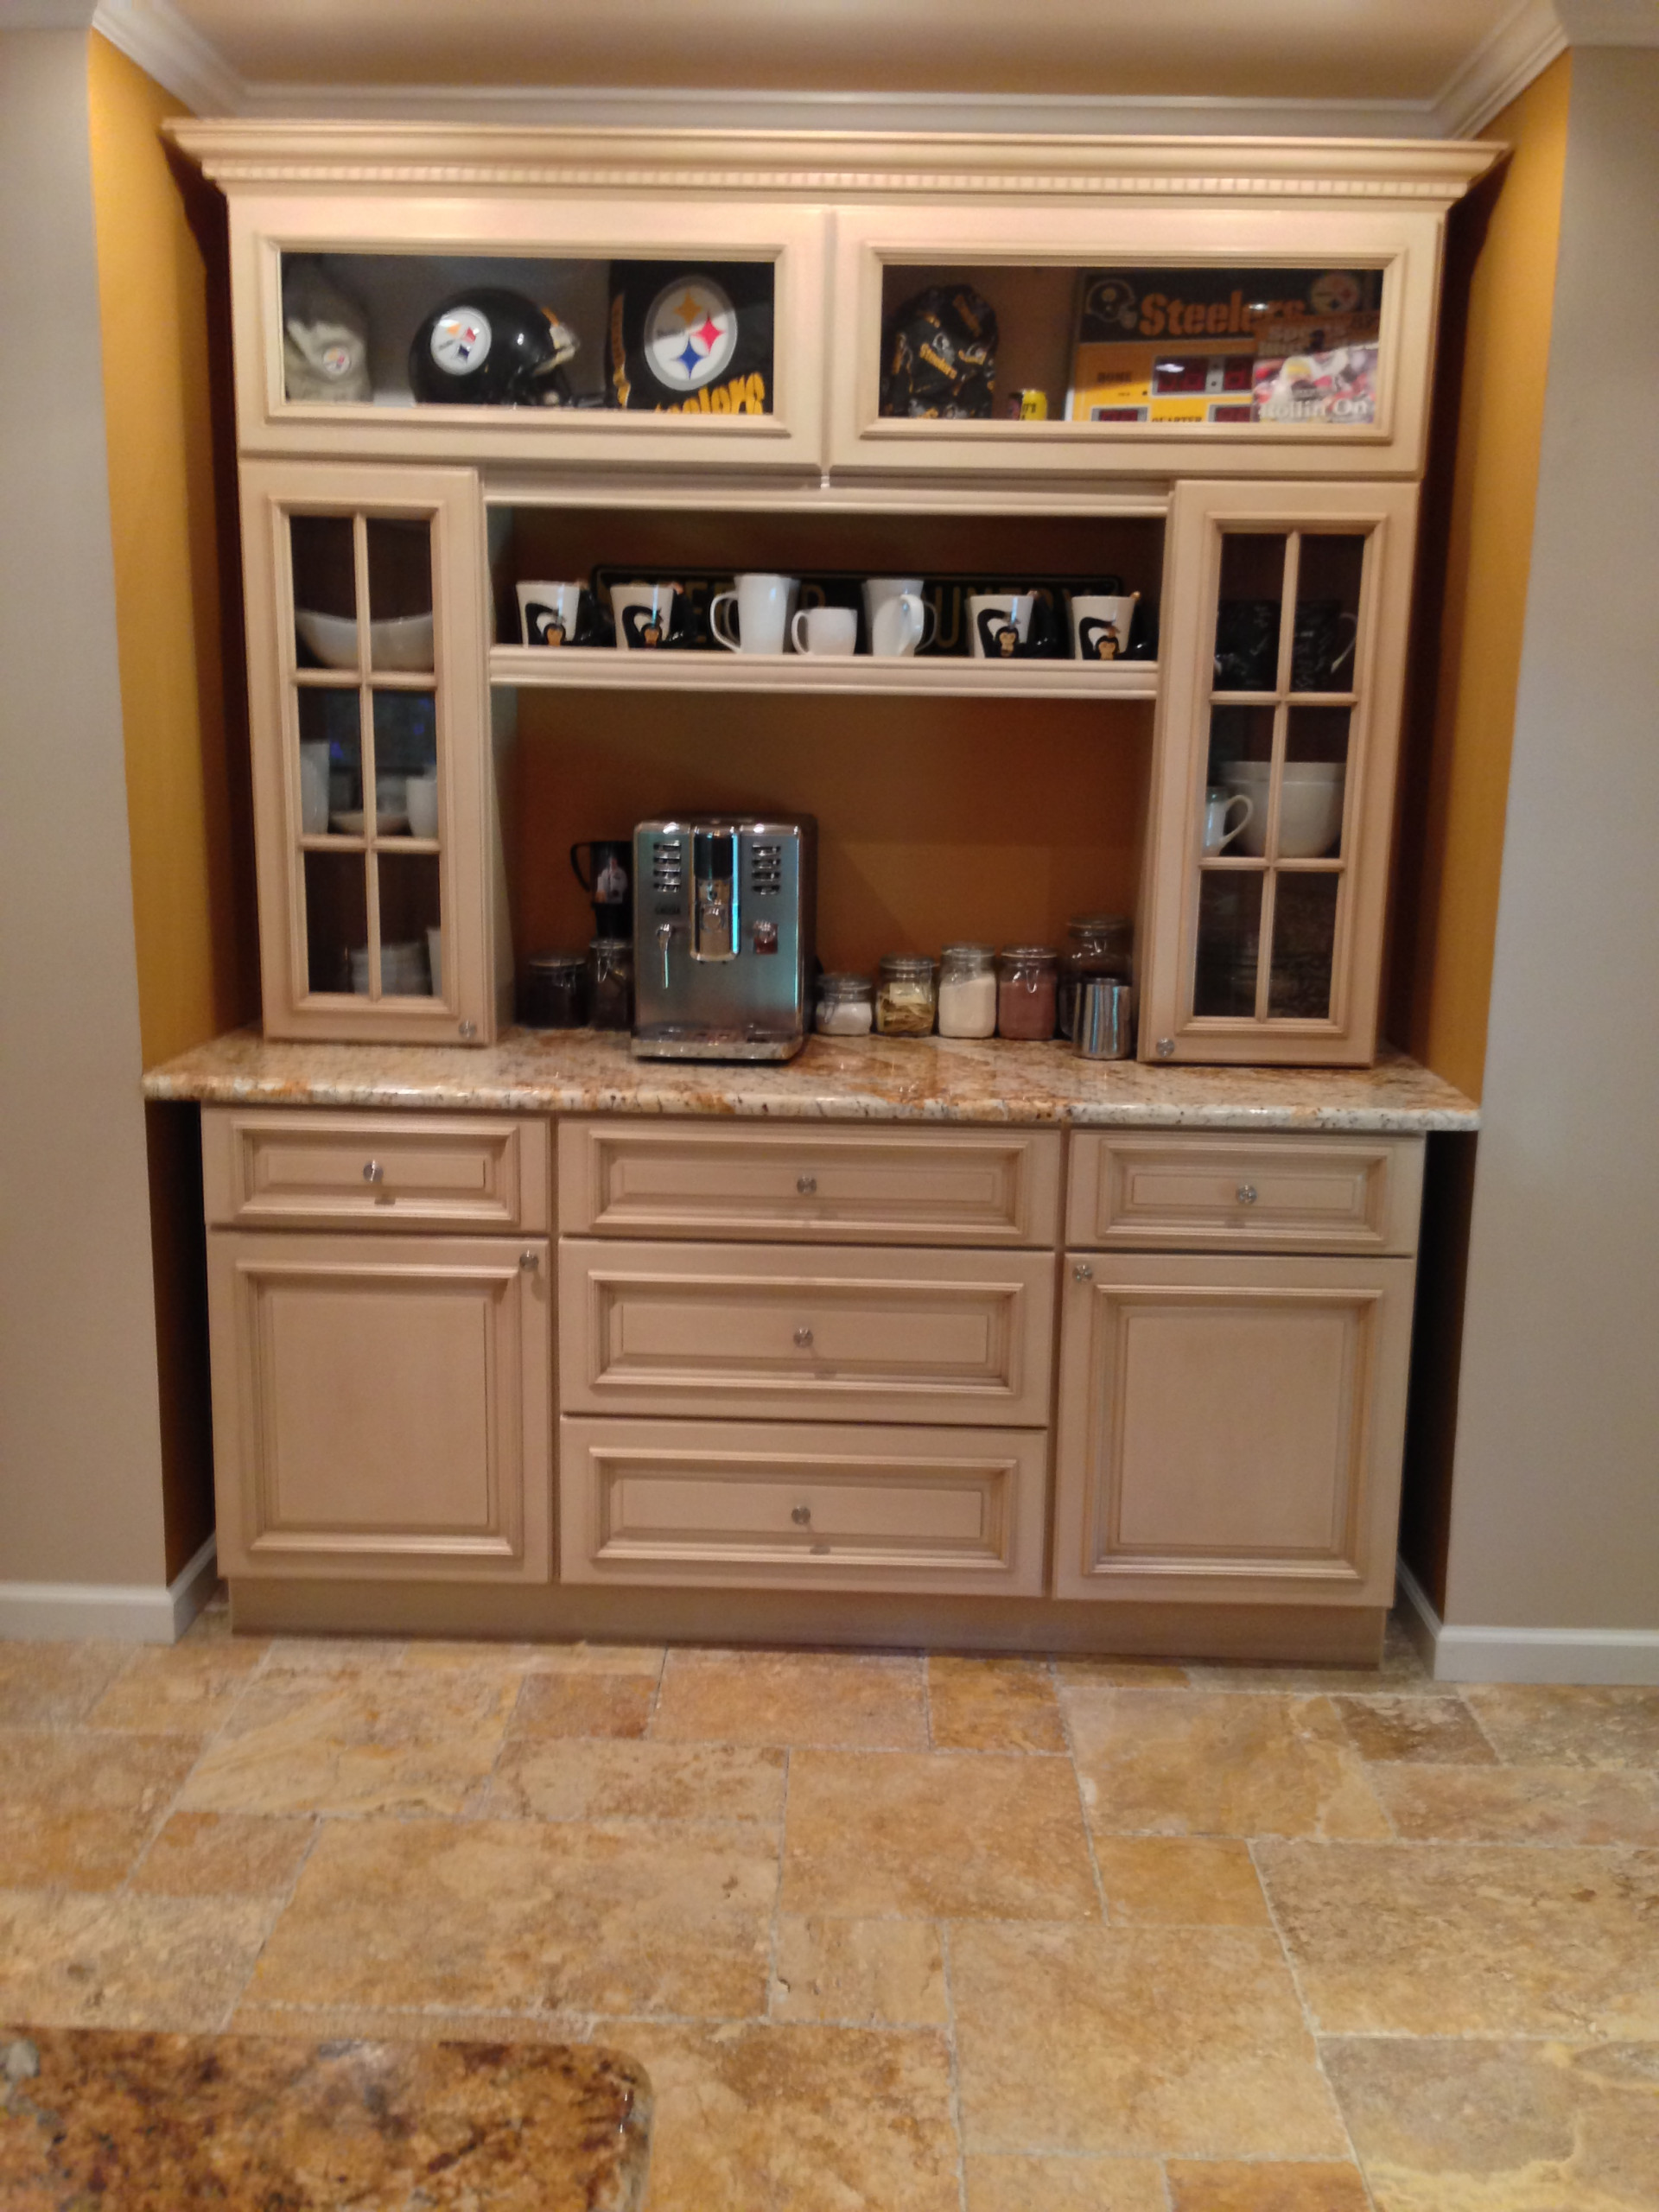 Built In Coffee Bar Houzz, Coffee Bar Cabinet Built In